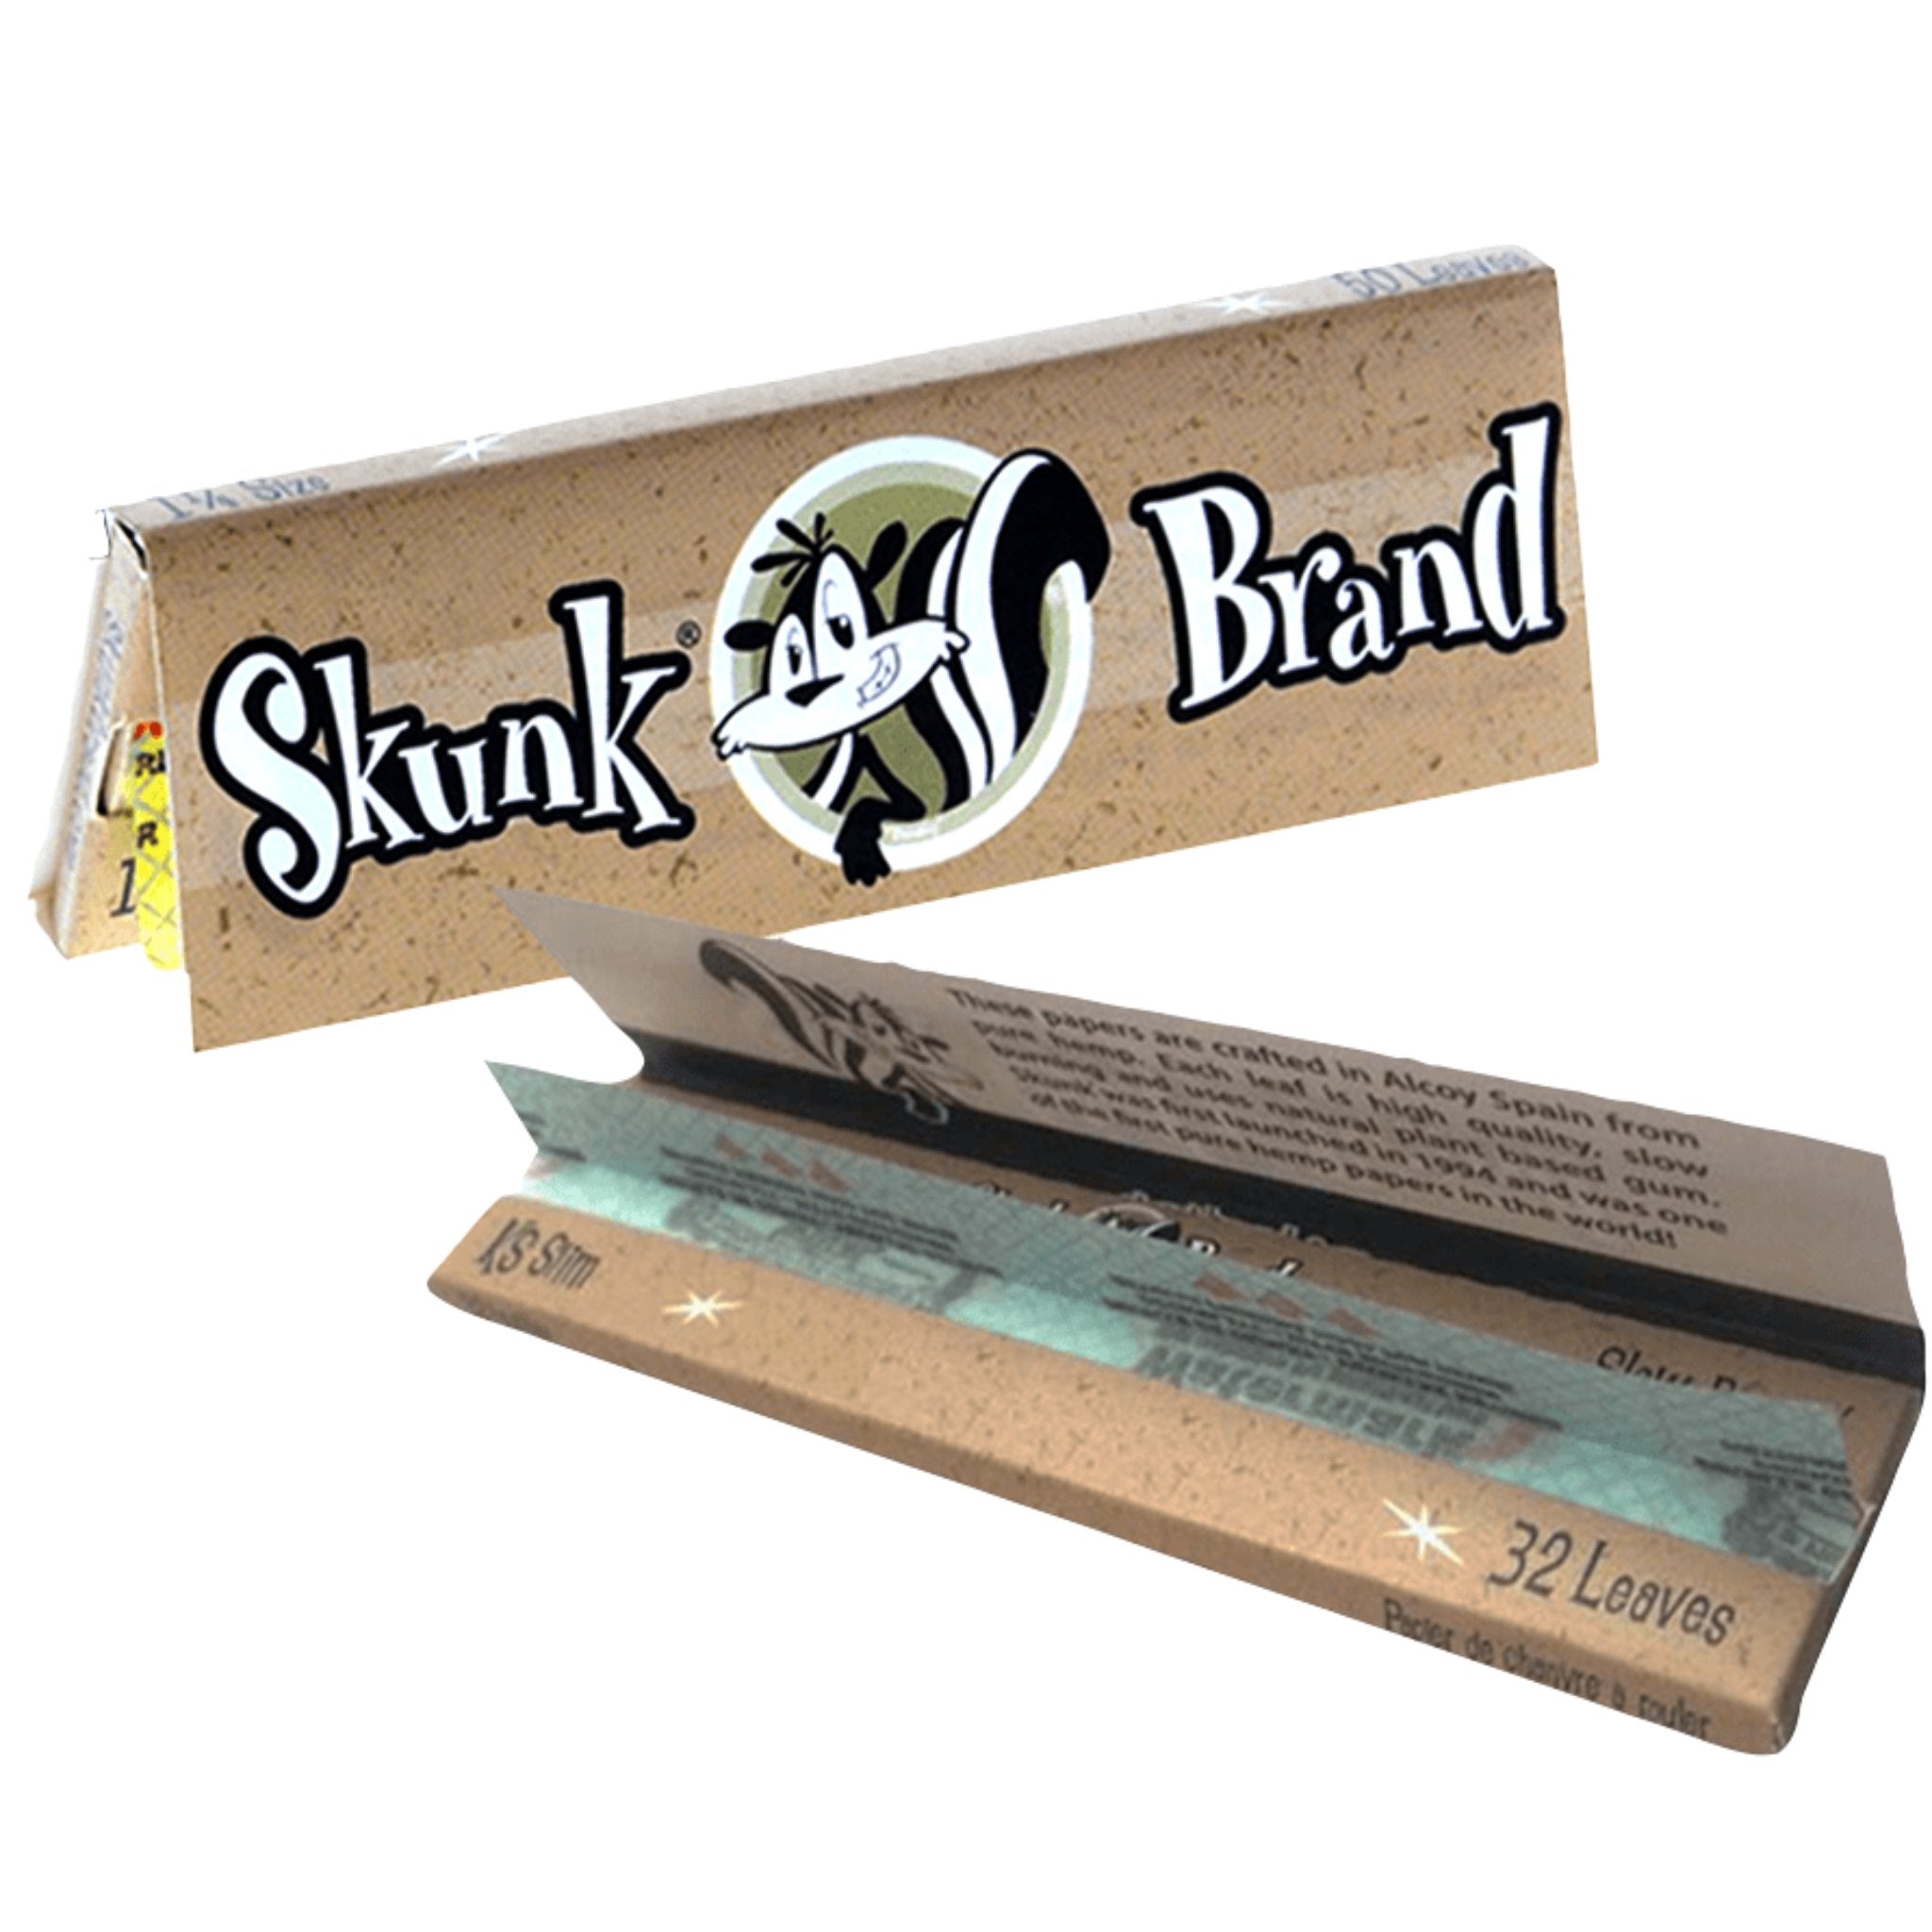 Skunk Rolling Papers - 3 Pack 1 1/4 - 3 Pack